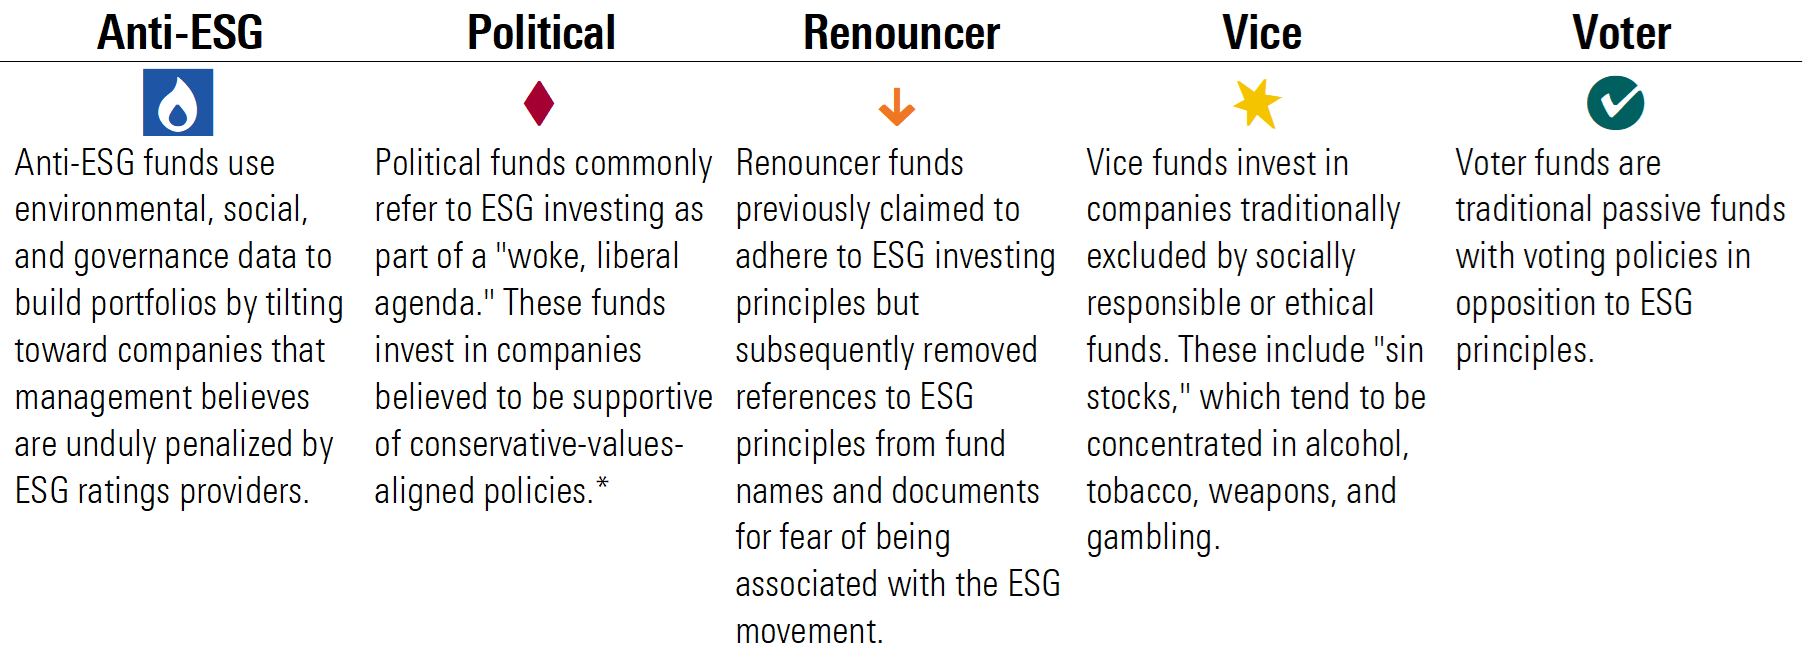 Table showing 5 anti-ESG fund categories and definitions: Anti-ESG, Political, Renouncer, Vice, and Voter